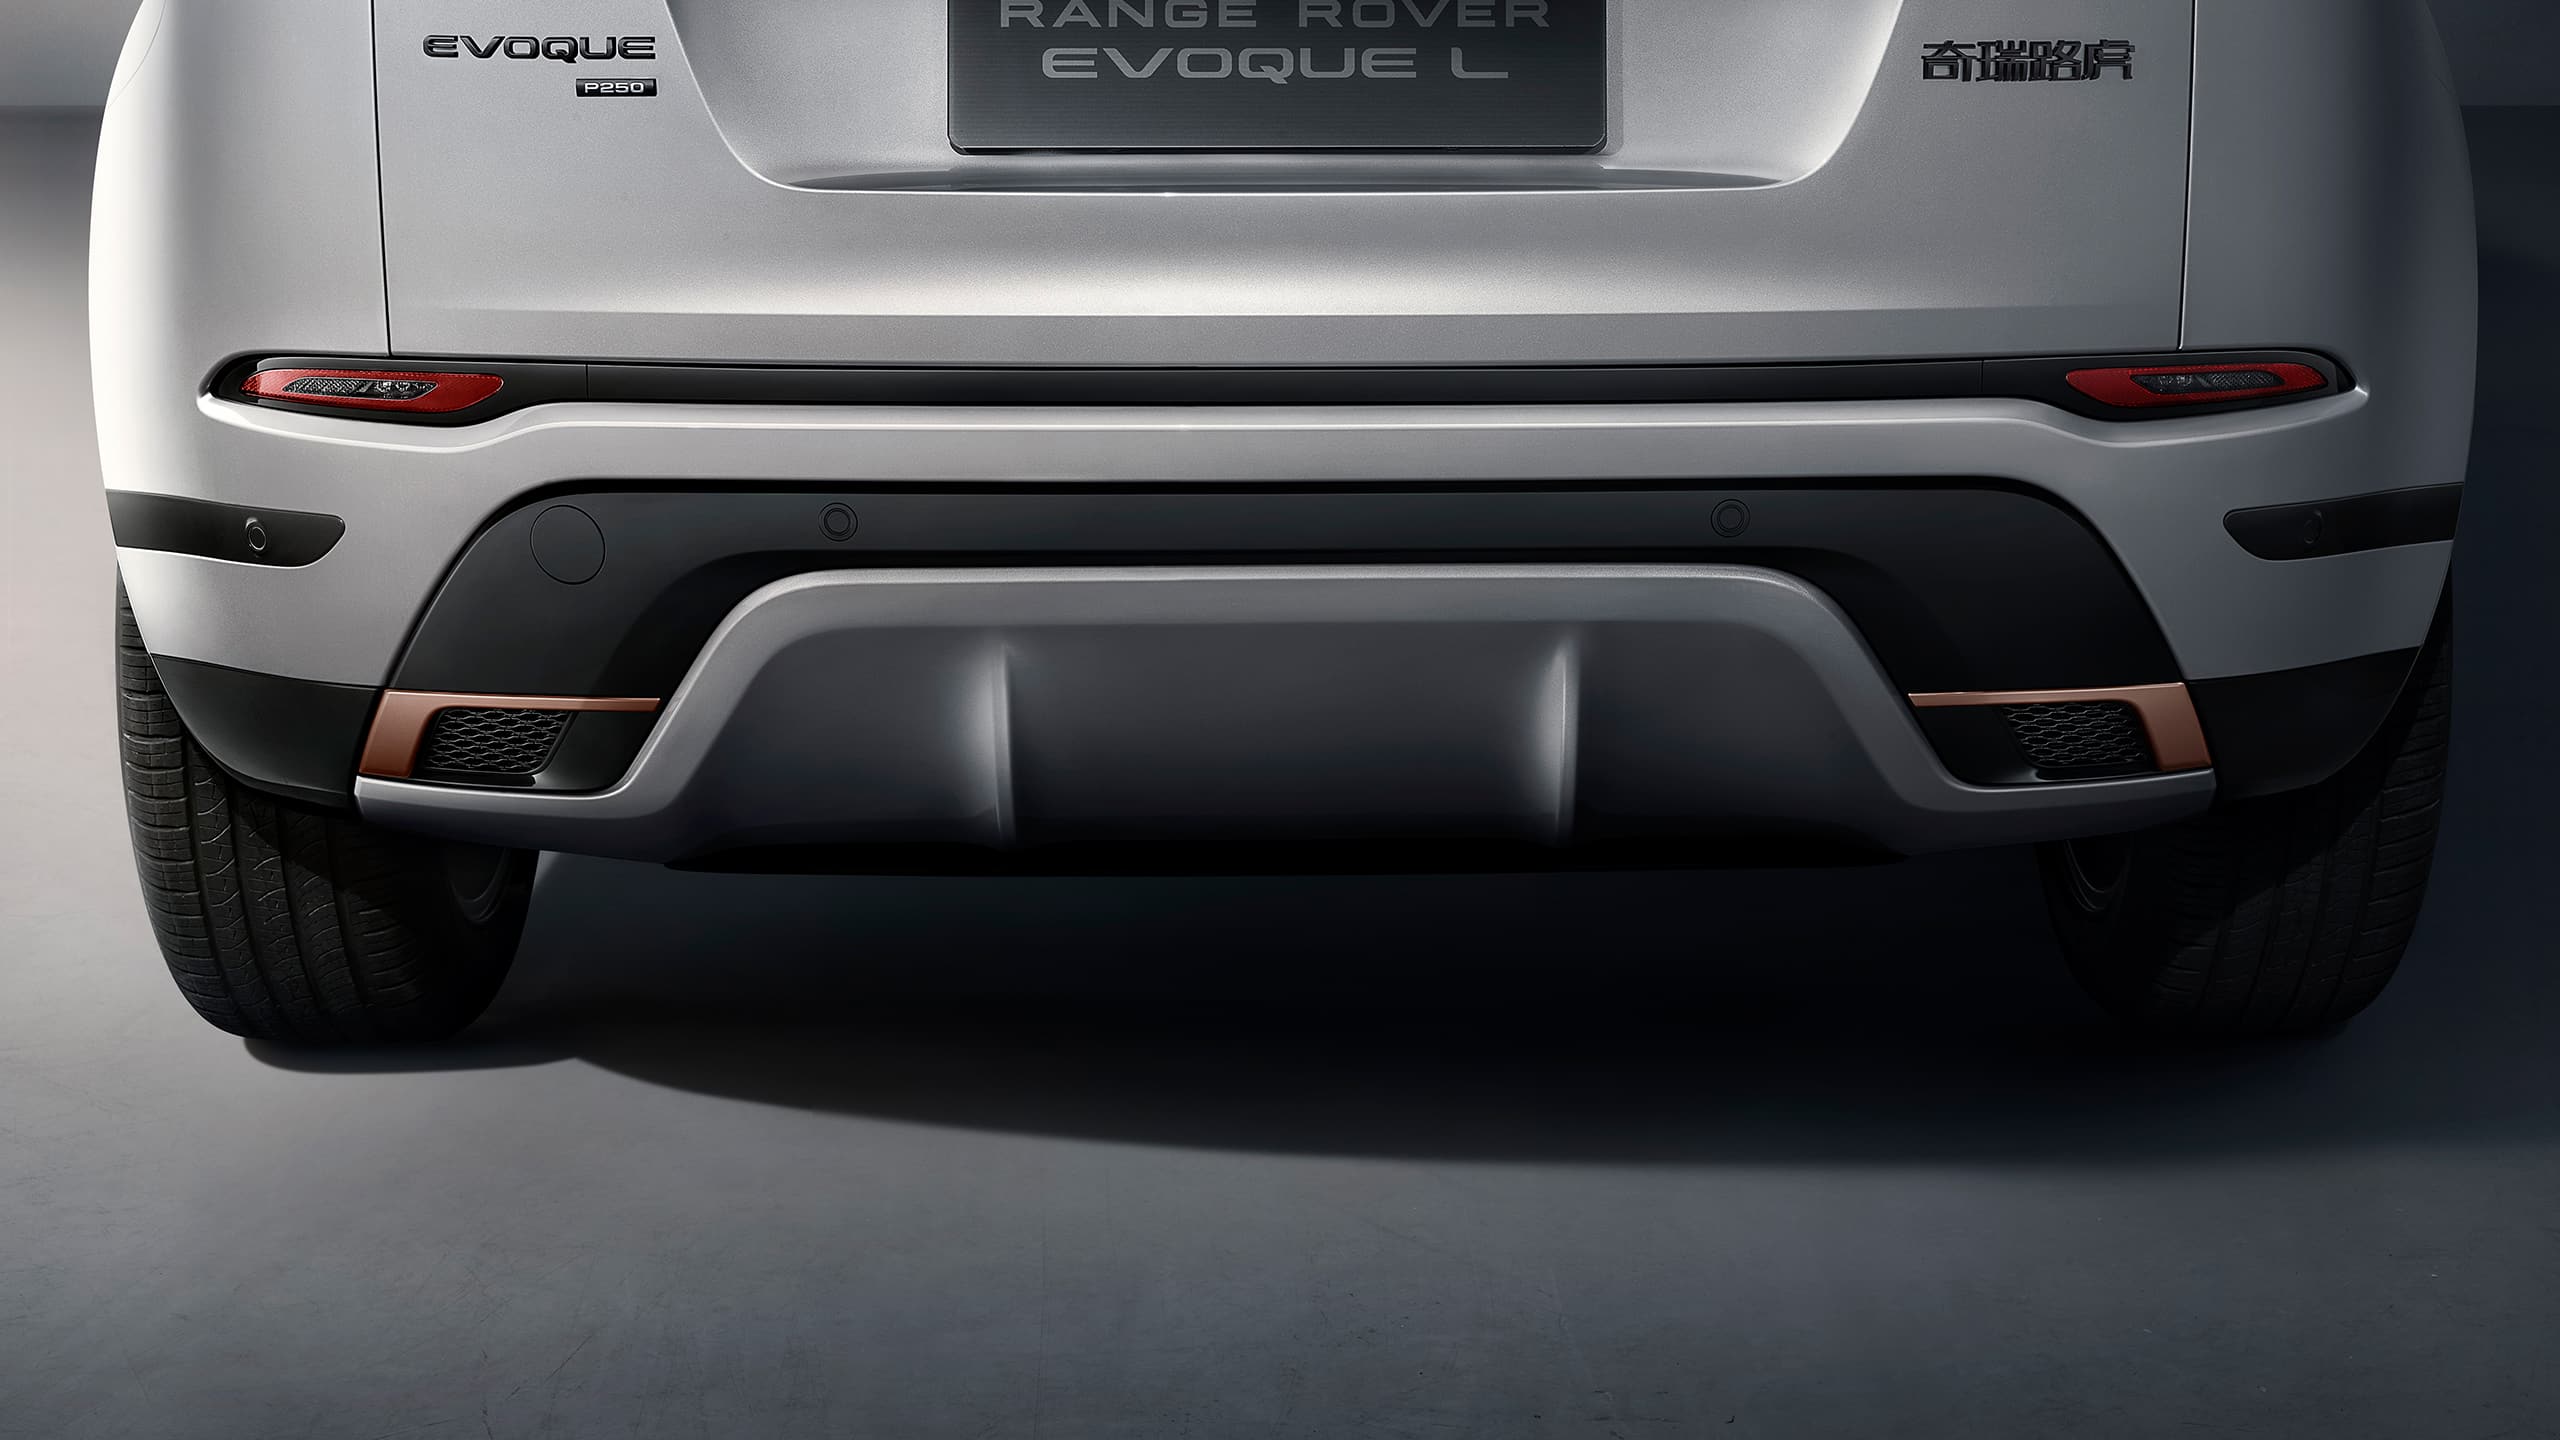 Range Rover Evoque Copper plated exhaust pipe